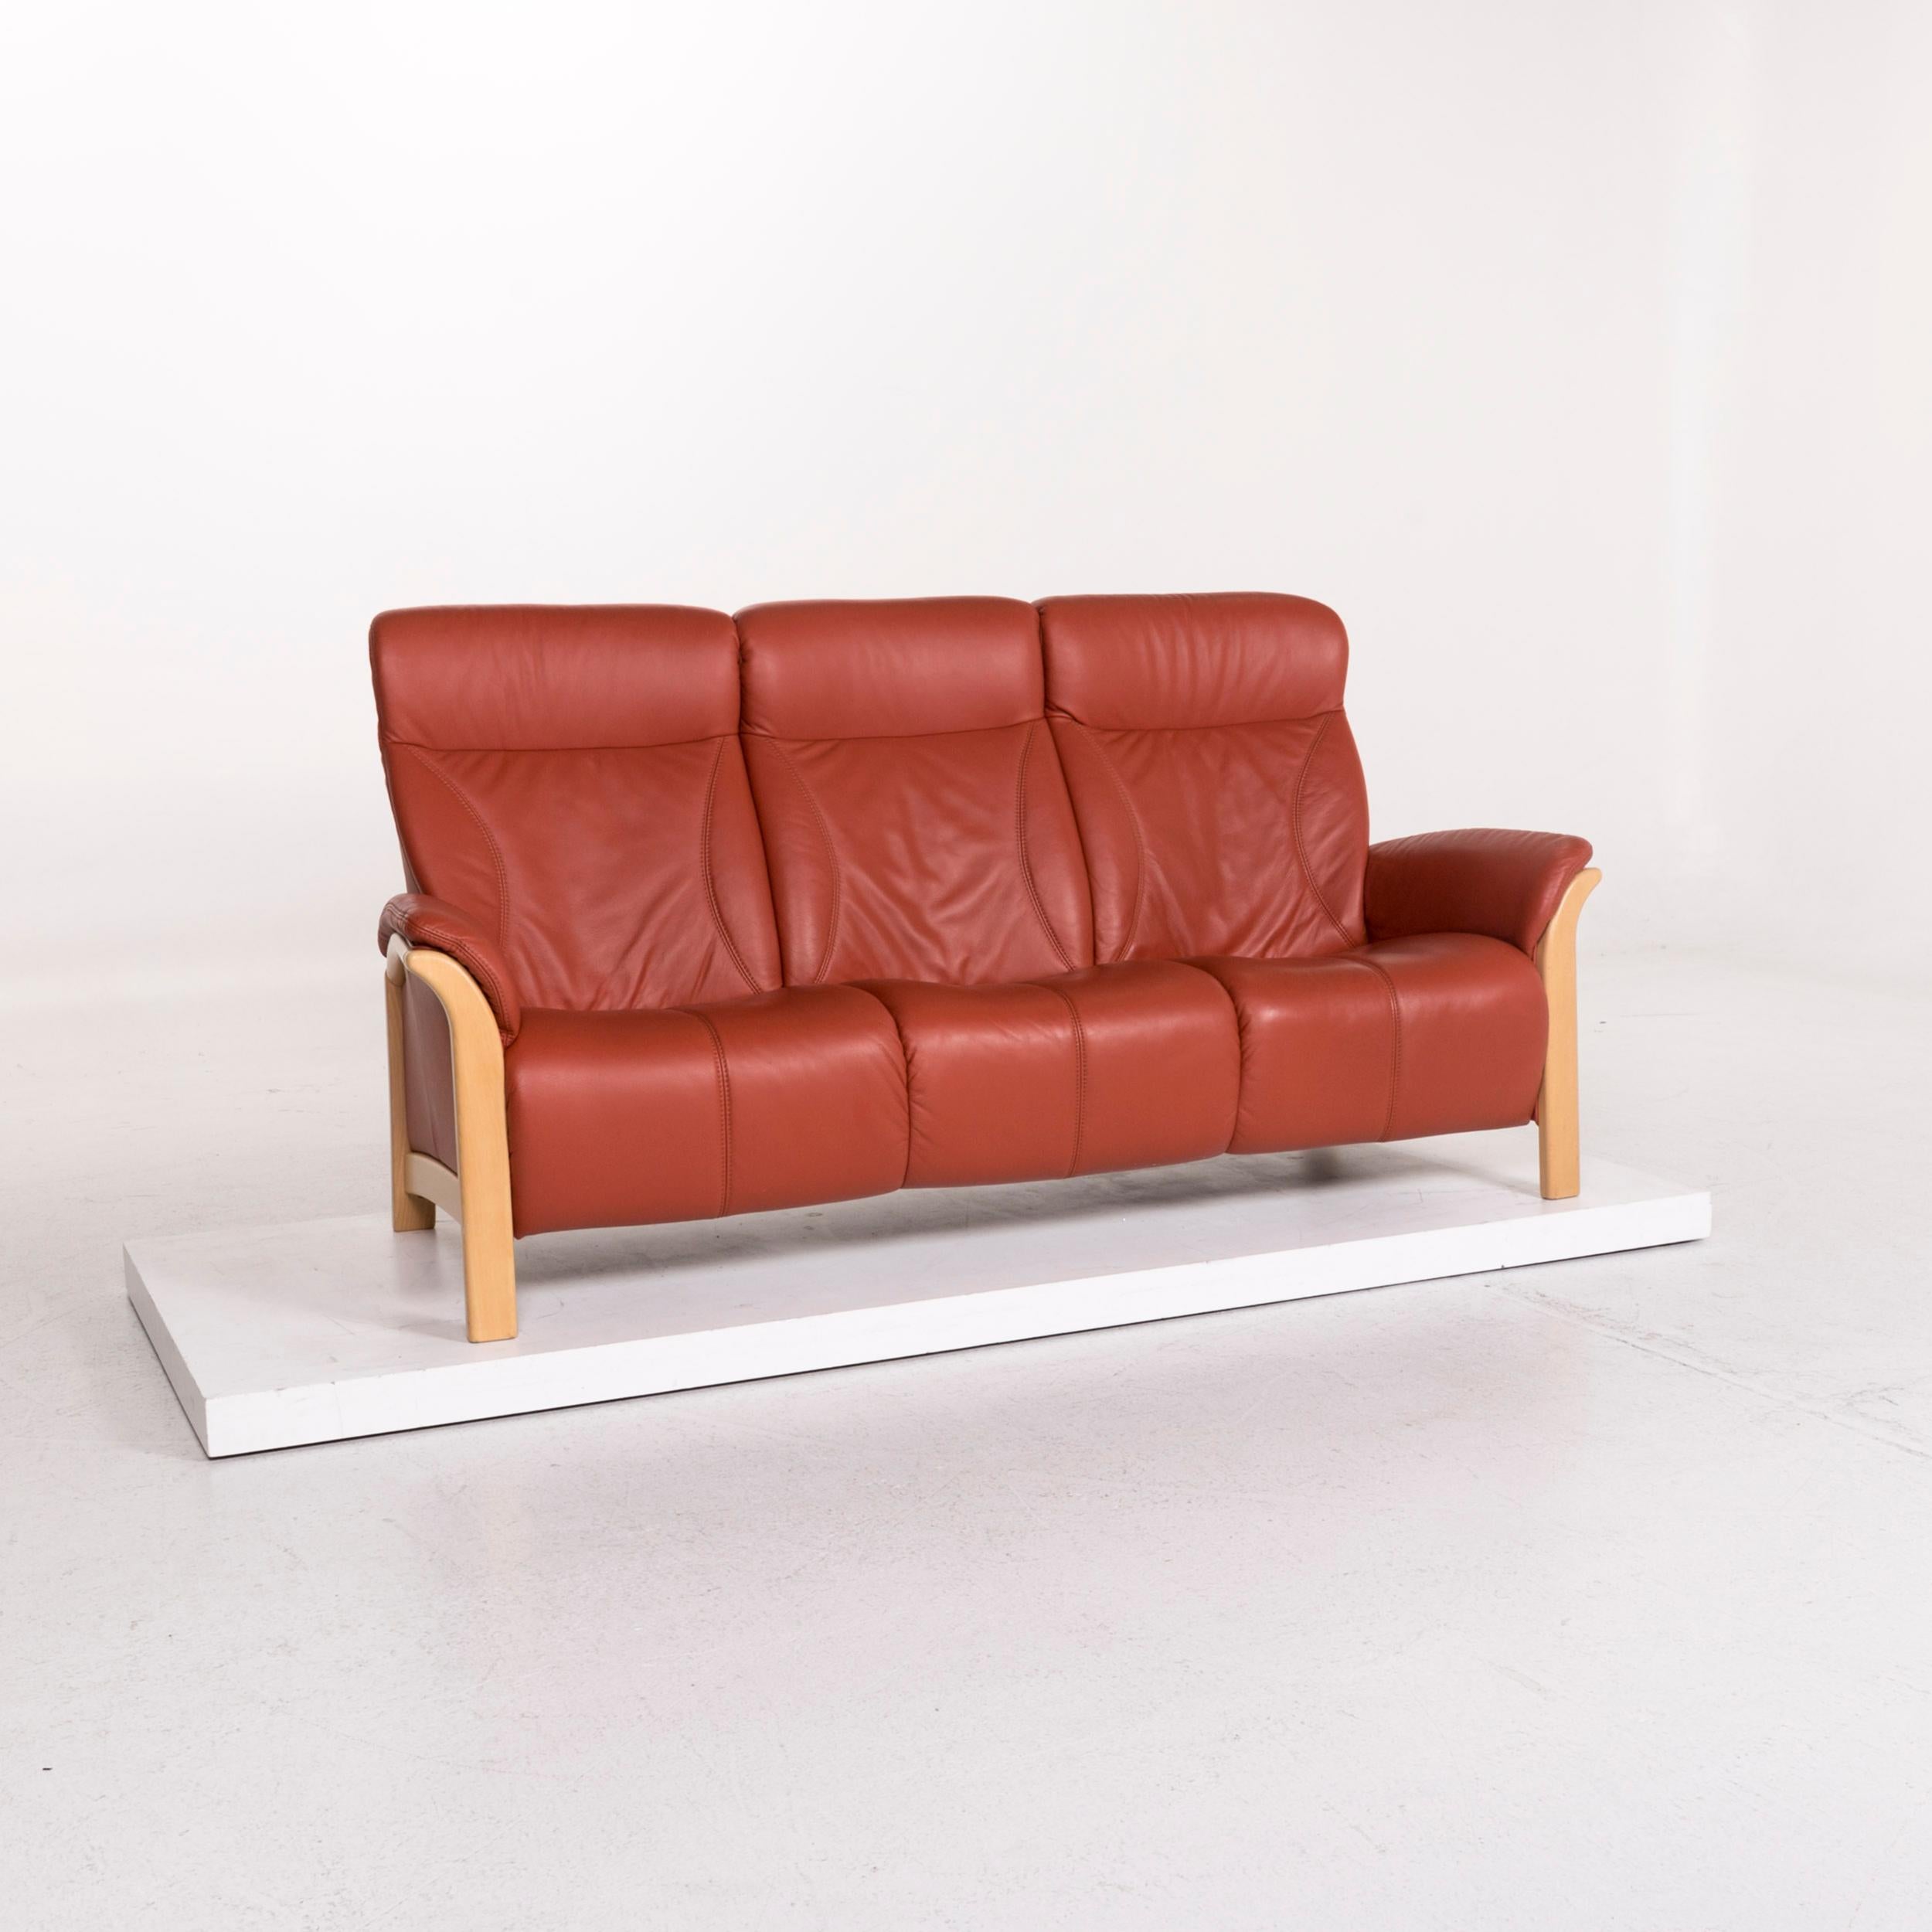 Himolla Windsor Leather Sofa Red Three-Seat Couch In Good Condition For Sale In Cologne, DE